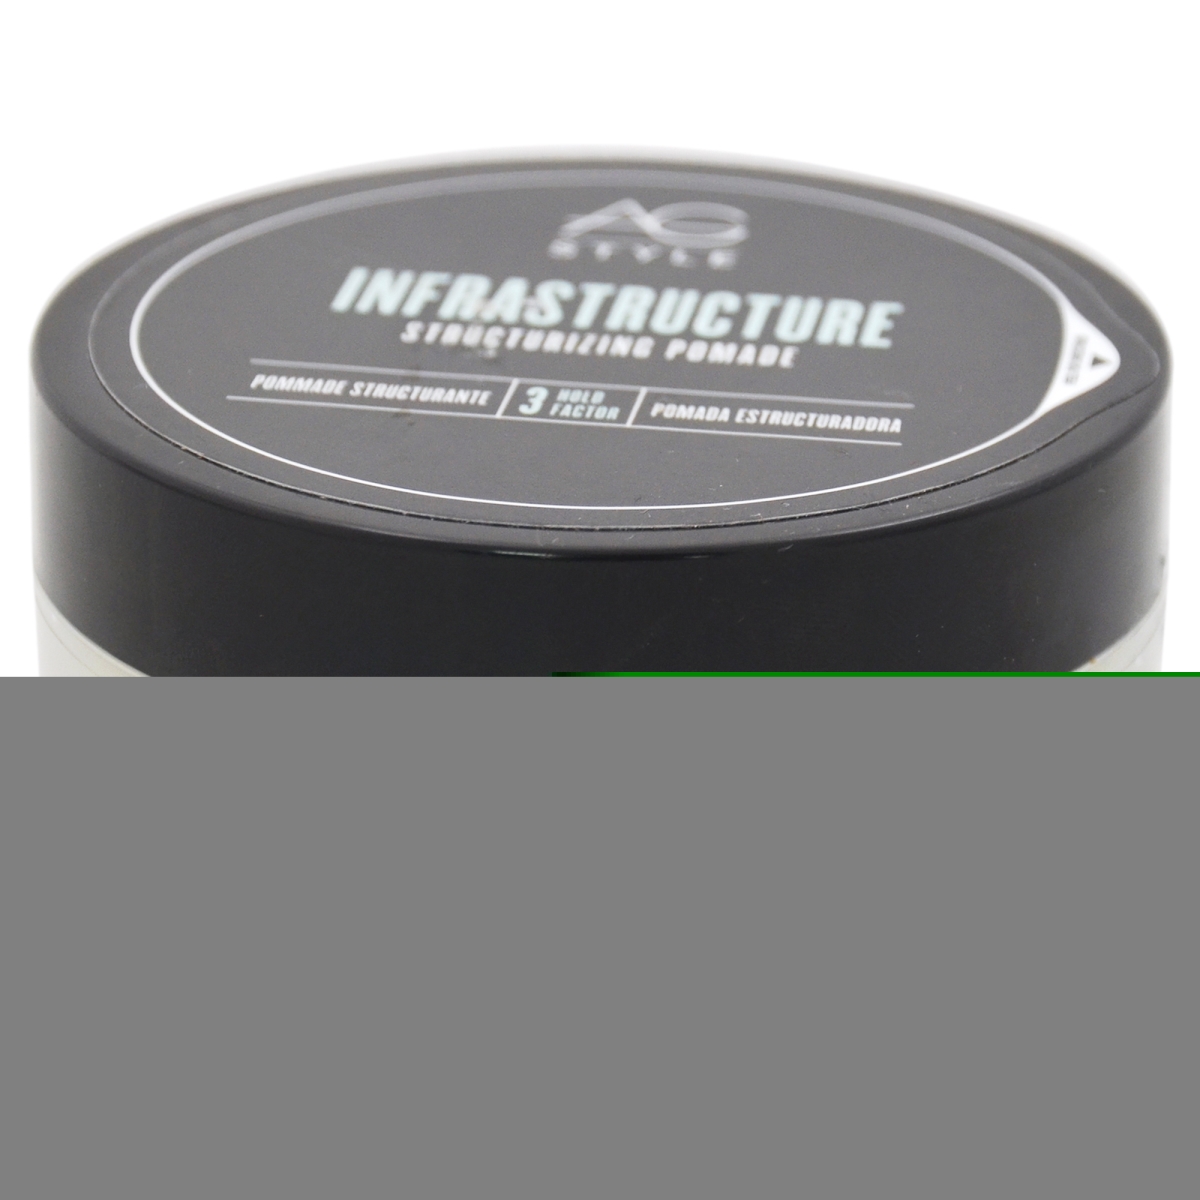 Picture of AG Hair Cosmetics U-HC-10704 Infrastructure Structurizing Pomade for Unisex - 2.5 oz